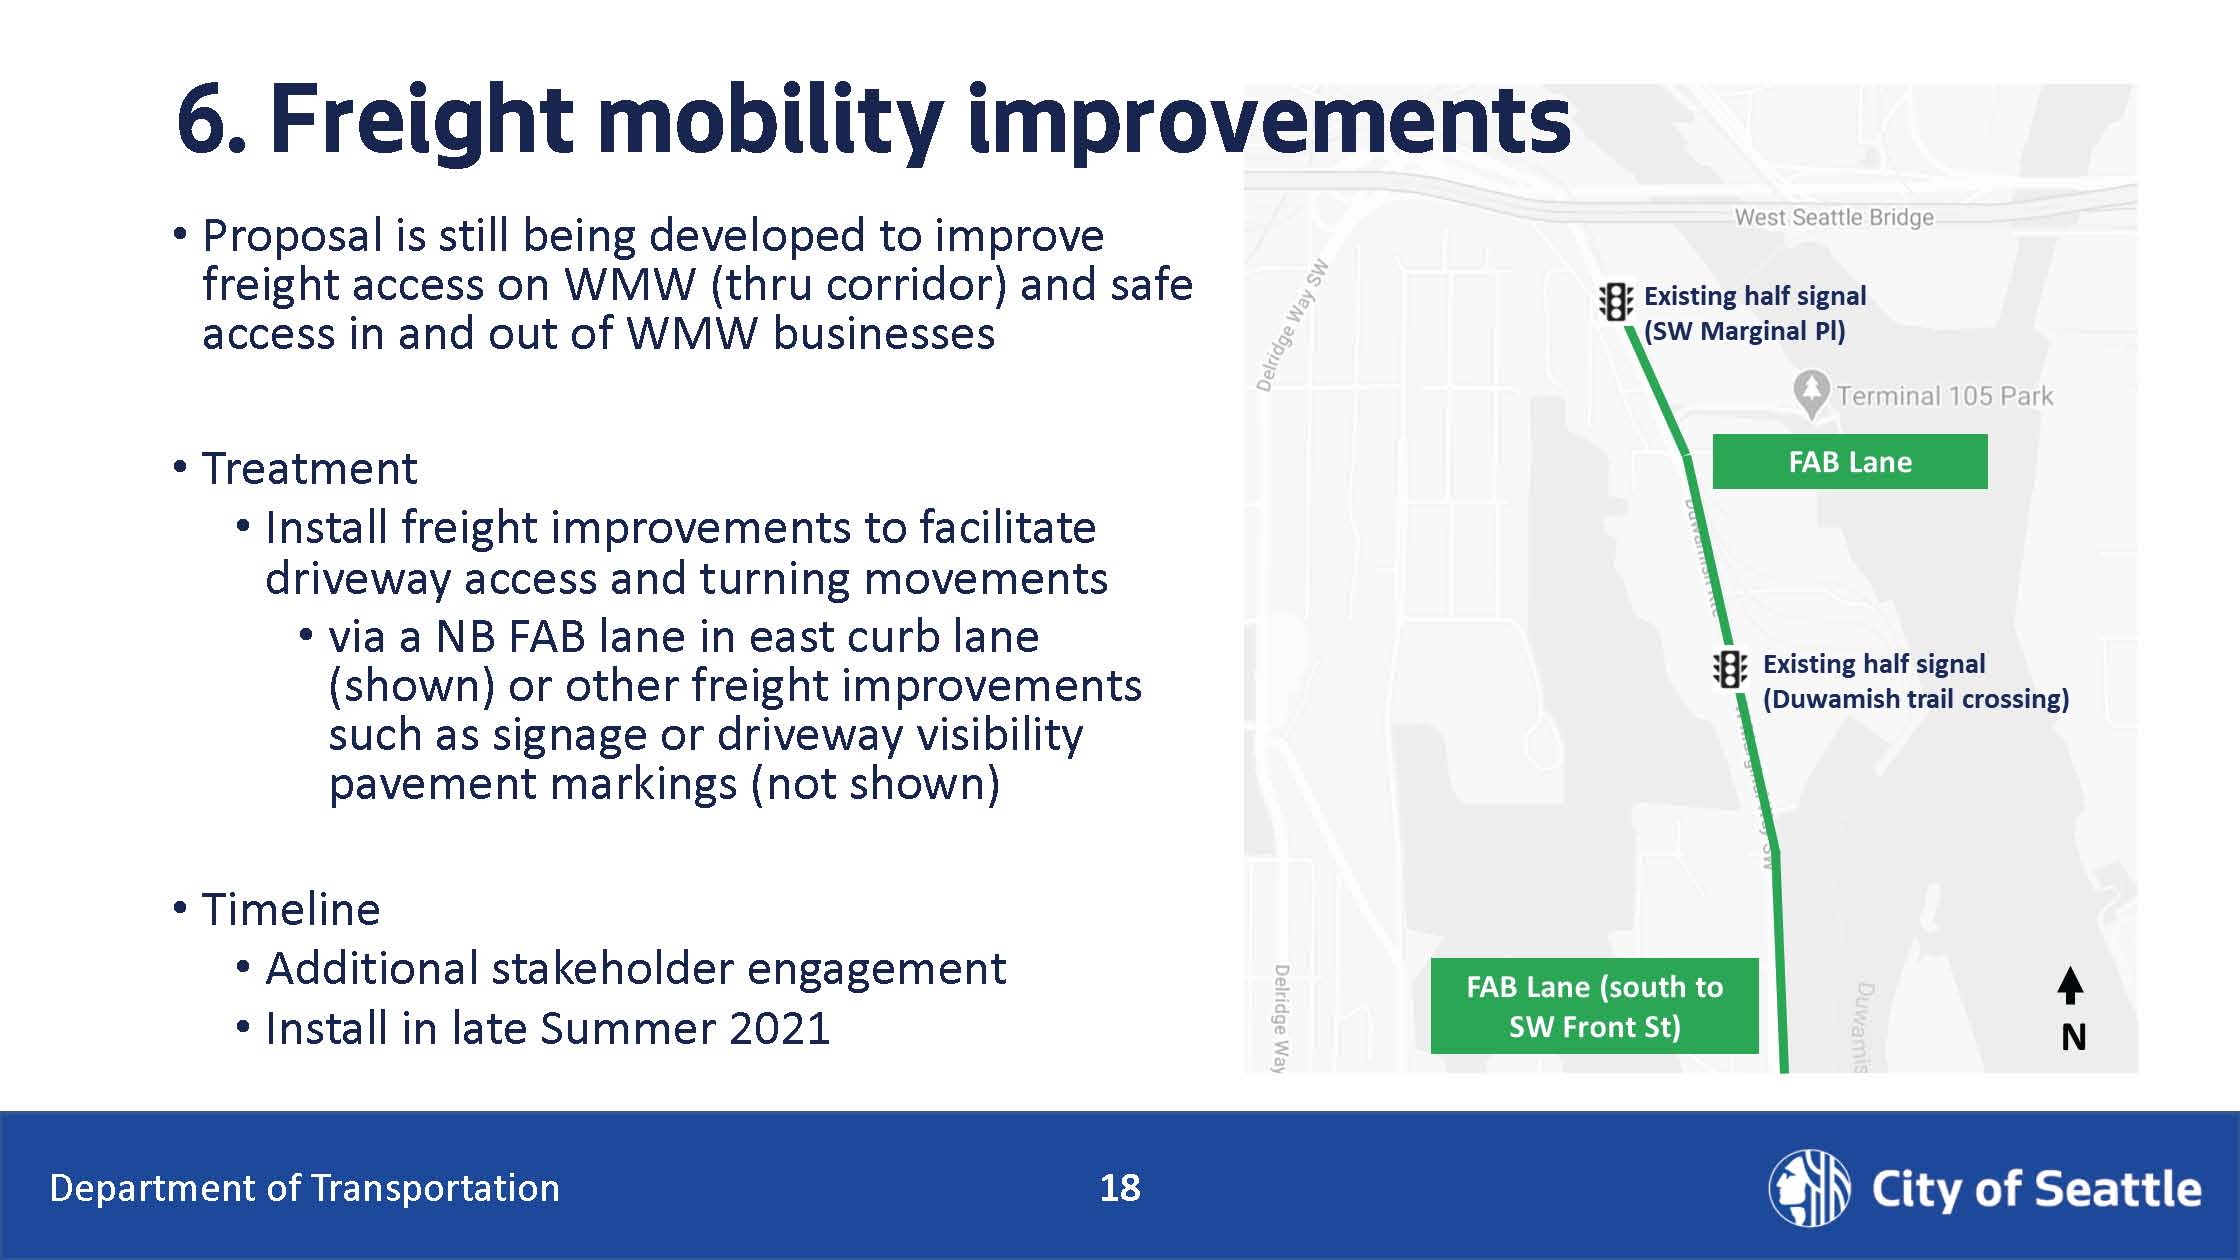 Freight mobility improvements